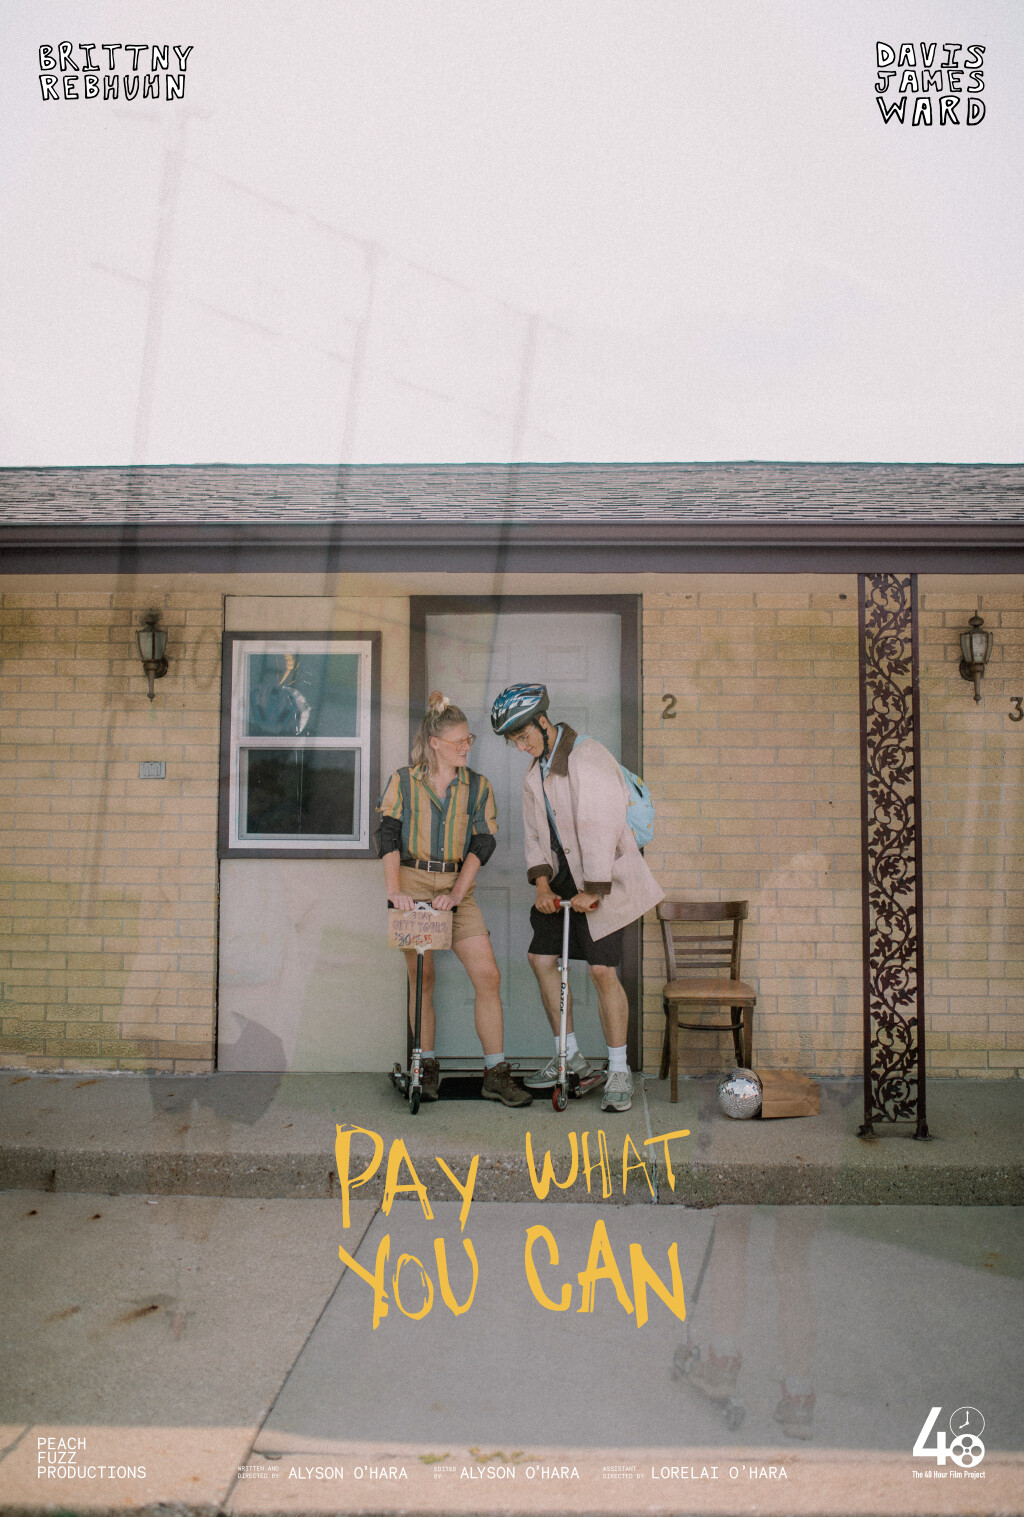 Filmposter for Pay What You Can